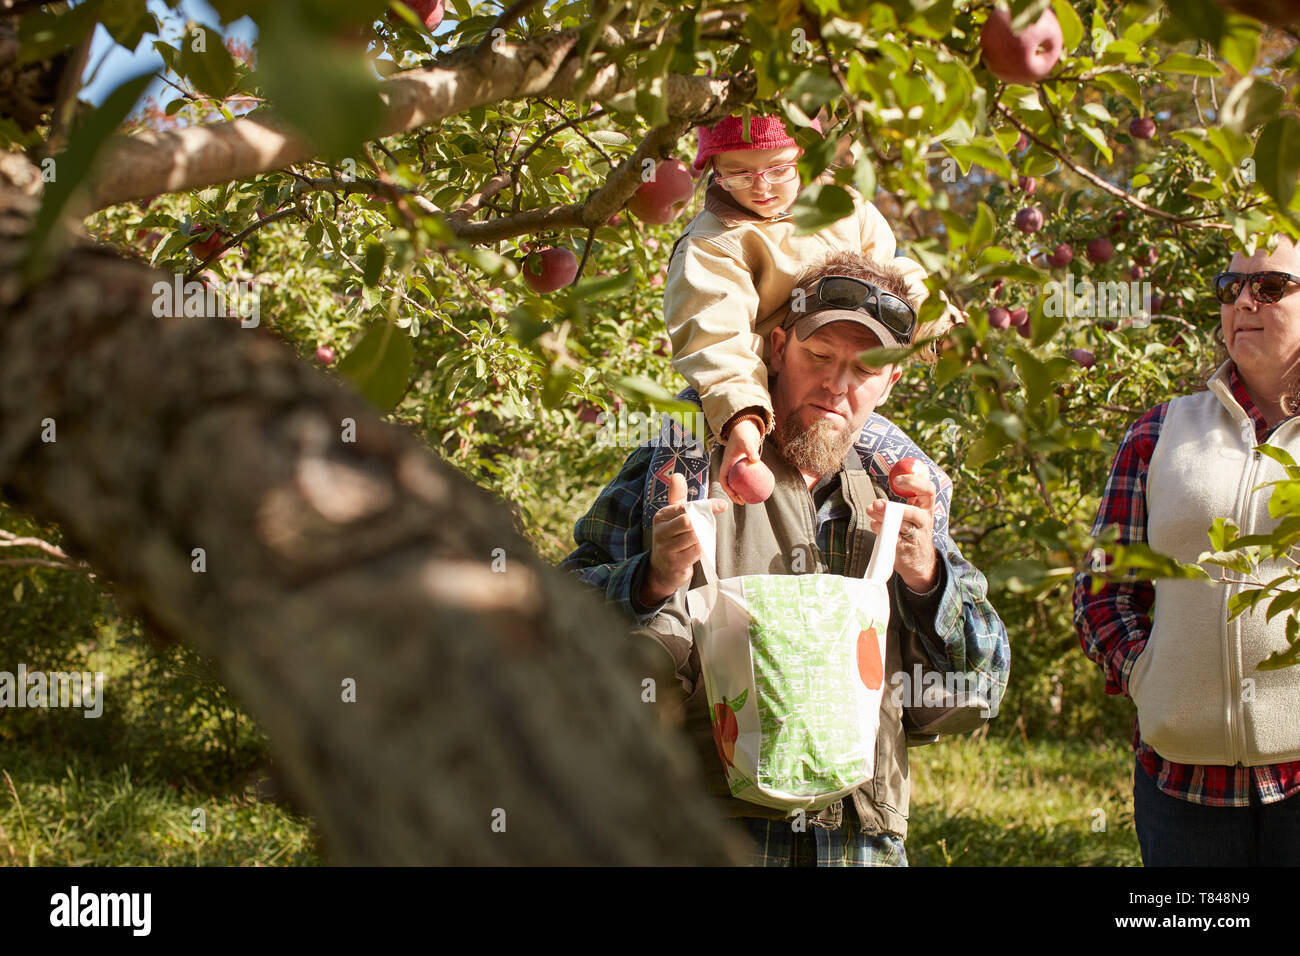 Father and daughter picking apples from tree Stock Photo